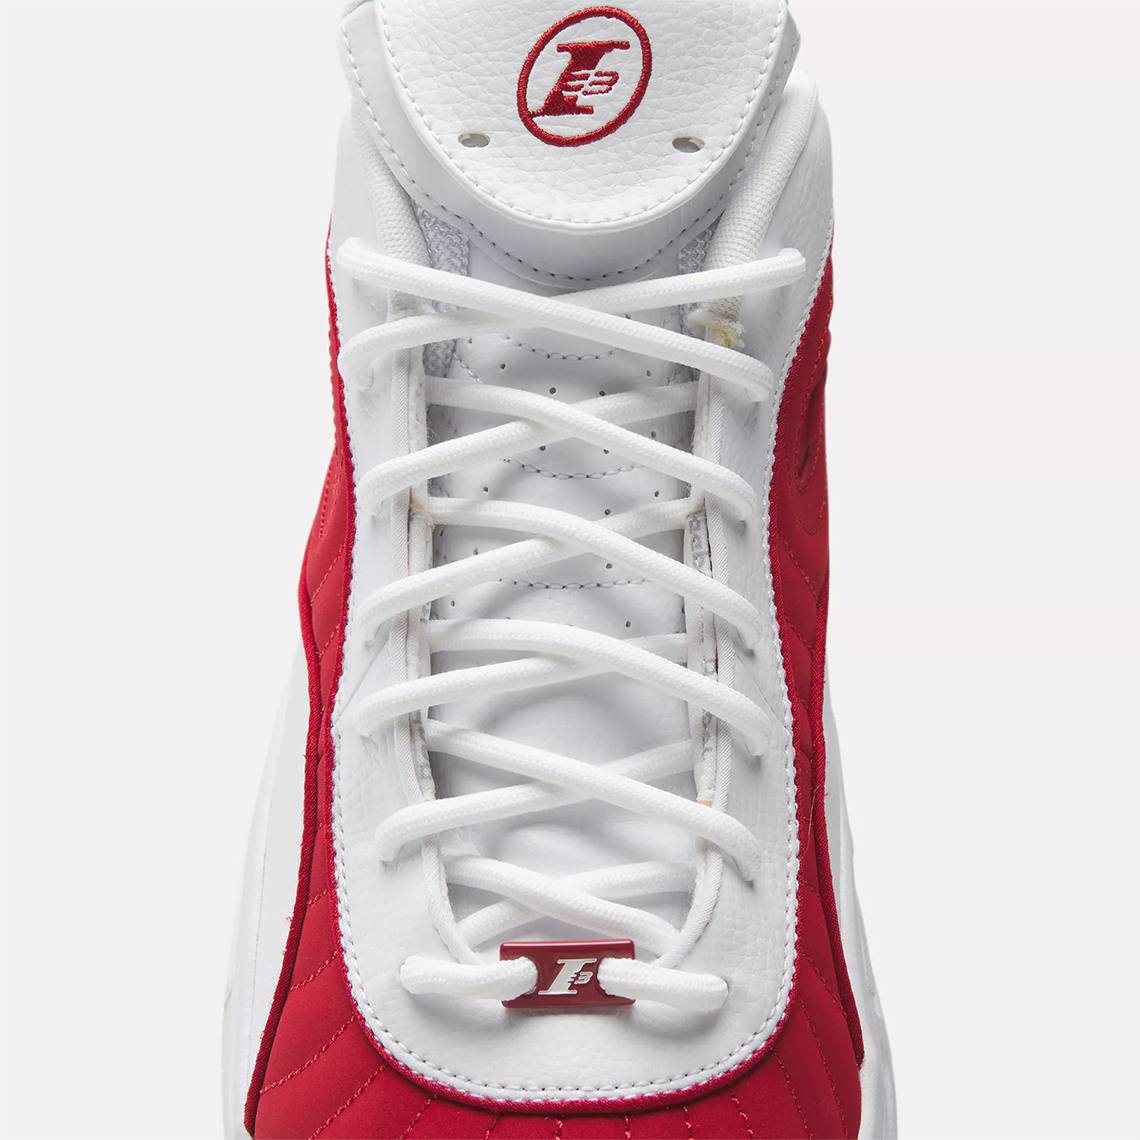 The Reebok Answer III White/Red Is Available Now